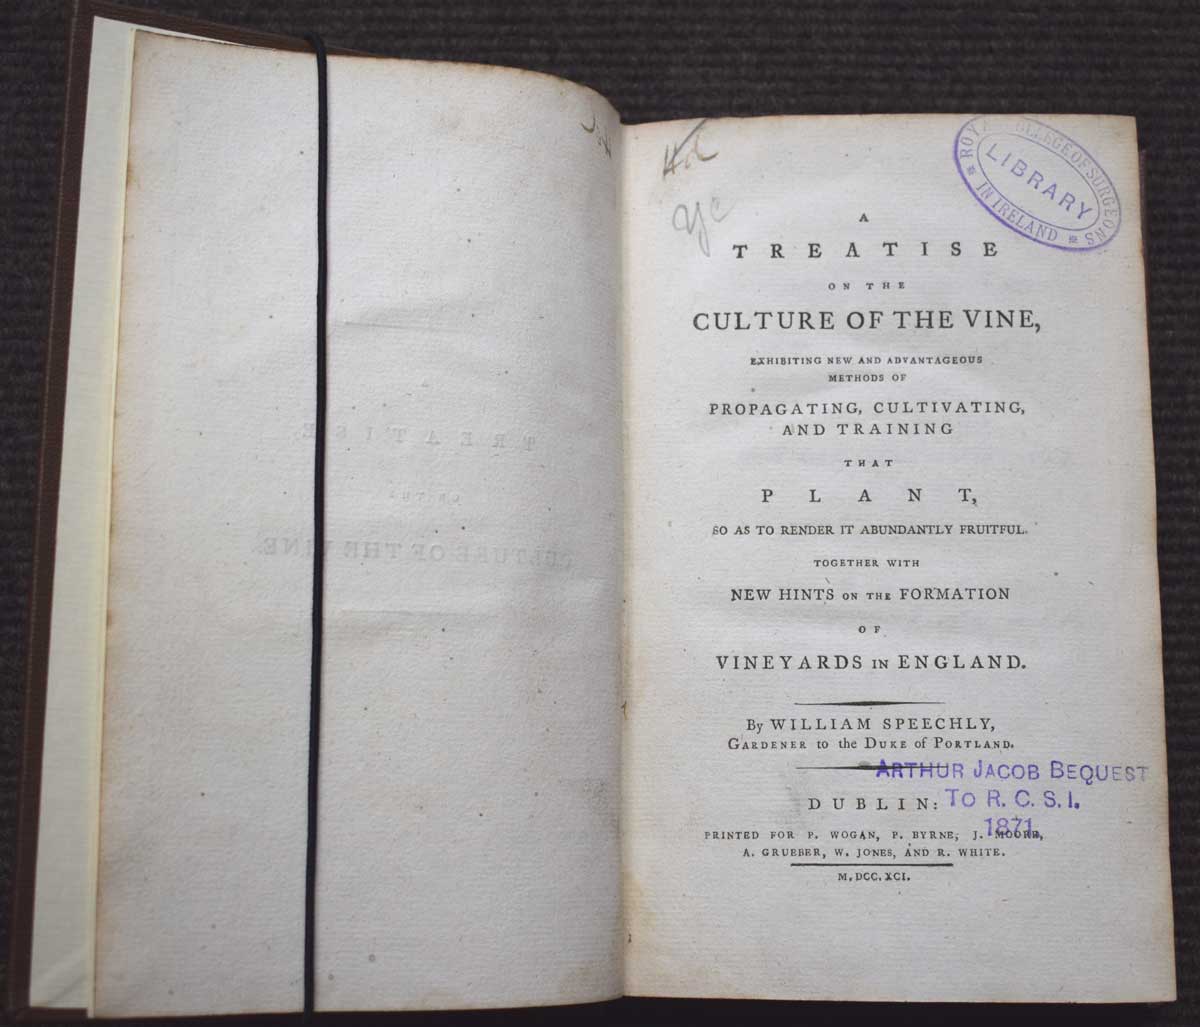 A Treatise on the Culture of the Vine, Exhibiting New and Advantageous Methods of Propagating, Cultivating, and Training That Plant, So As To Render it Abundantly Fruitful. Together with New Hints on the Formation of Vineyards in England.